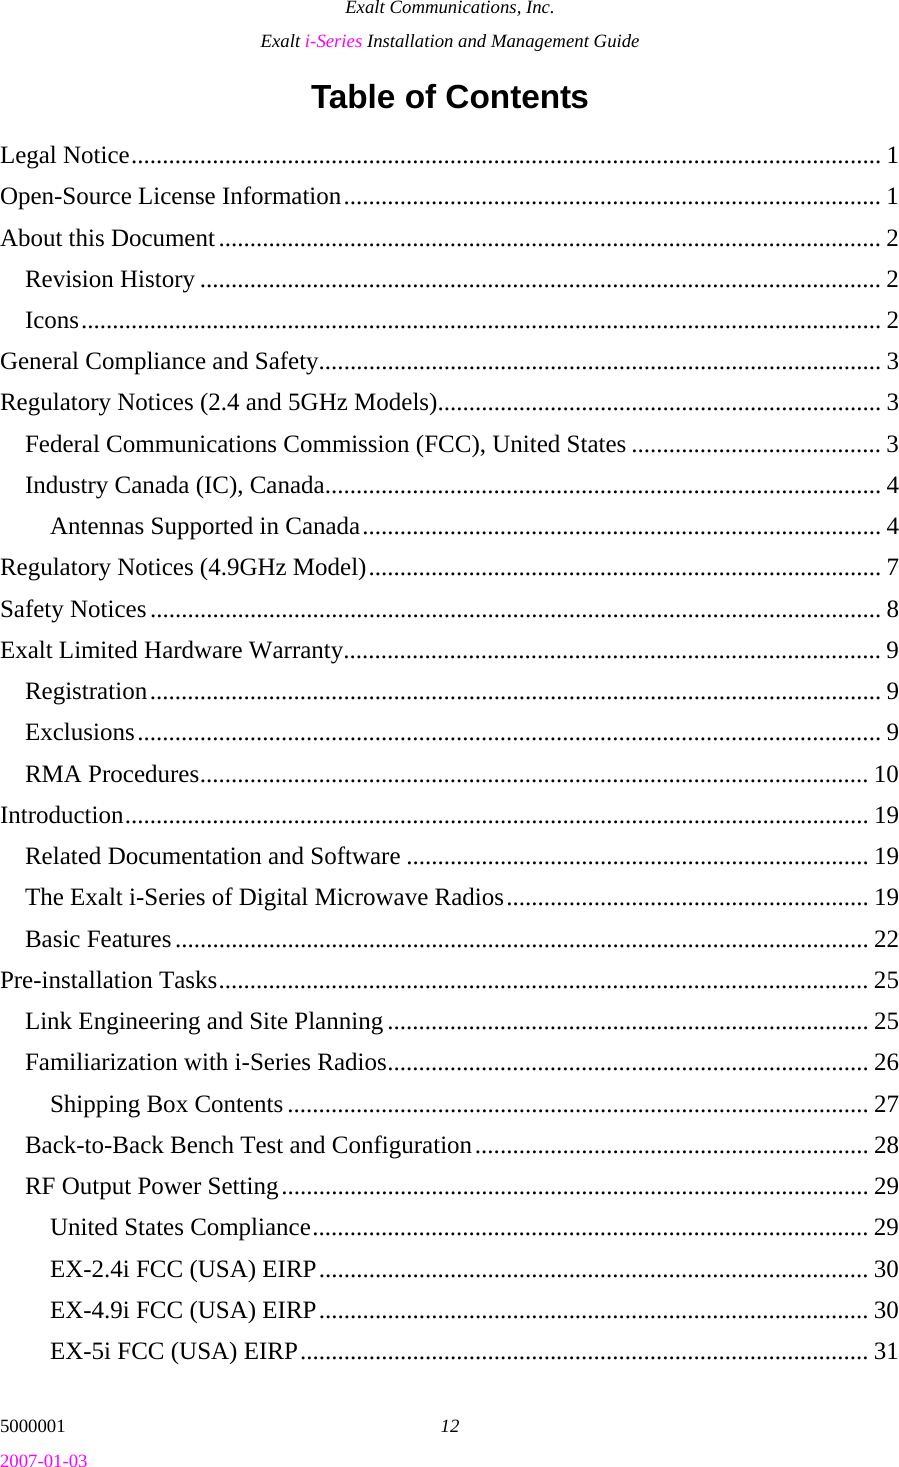 Exalt Communications, Inc. Exalt i-Series Installation and Management Guide 5000001  12 2007-01-03 Table of Contents Legal Notice........................................................................................................................ 1 Open-Source License Information...................................................................................... 1 About this Document.......................................................................................................... 2 Revision History ............................................................................................................. 2 Icons................................................................................................................................ 2 General Compliance and Safety.......................................................................................... 3 Regulatory Notices (2.4 and 5GHz Models)....................................................................... 3 Federal Communications Commission (FCC), United States ........................................ 3 Industry Canada (IC), Canada......................................................................................... 4 Antennas Supported in Canada................................................................................... 4 Regulatory Notices (4.9GHz Model).................................................................................. 7 Safety Notices..................................................................................................................... 8 Exalt Limited Hardware Warranty...................................................................................... 9 Registration..................................................................................................................... 9 Exclusions....................................................................................................................... 9 RMA Procedures........................................................................................................... 10 Introduction....................................................................................................................... 19 Related Documentation and Software .......................................................................... 19 The Exalt i-Series of Digital Microwave Radios.......................................................... 19 Basic Features............................................................................................................... 22 Pre-installation Tasks........................................................................................................ 25 Link Engineering and Site Planning ............................................................................. 25 Familiarization with i-Series Radios............................................................................. 26 Shipping Box Contents ............................................................................................. 27 Back-to-Back Bench Test and Configuration............................................................... 28 RF Output Power Setting.............................................................................................. 29 United States Compliance......................................................................................... 29 EX-2.4i FCC (USA) EIRP........................................................................................ 30 EX-4.9i FCC (USA) EIRP........................................................................................ 30 EX-5i FCC (USA) EIRP........................................................................................... 31 